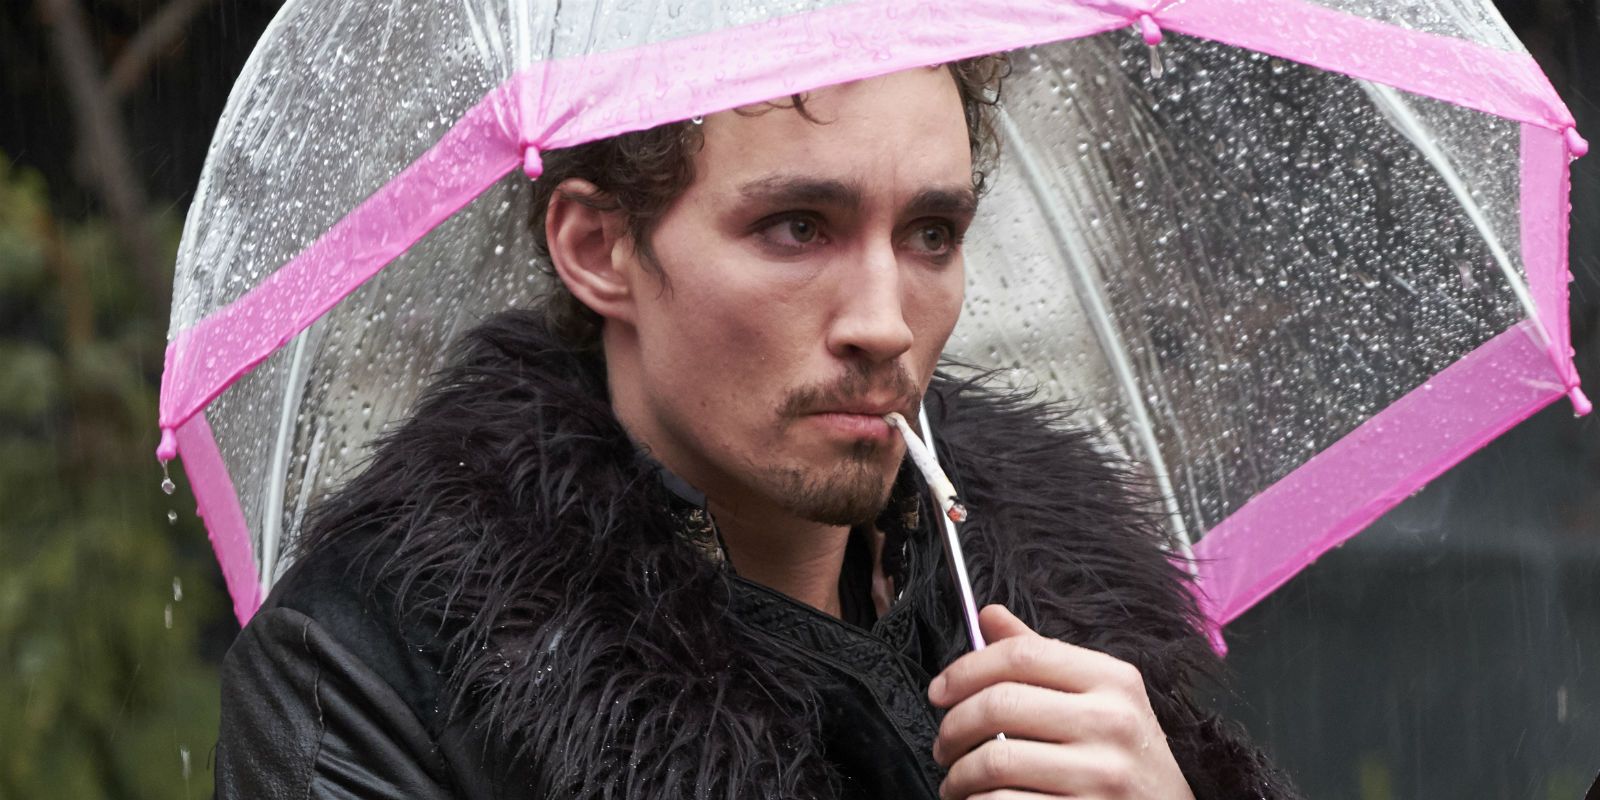 5 Ways The Umbrella Academy’s Klaus & Lost’s Charlie Are Alike (& 5 Ways They’re Different)